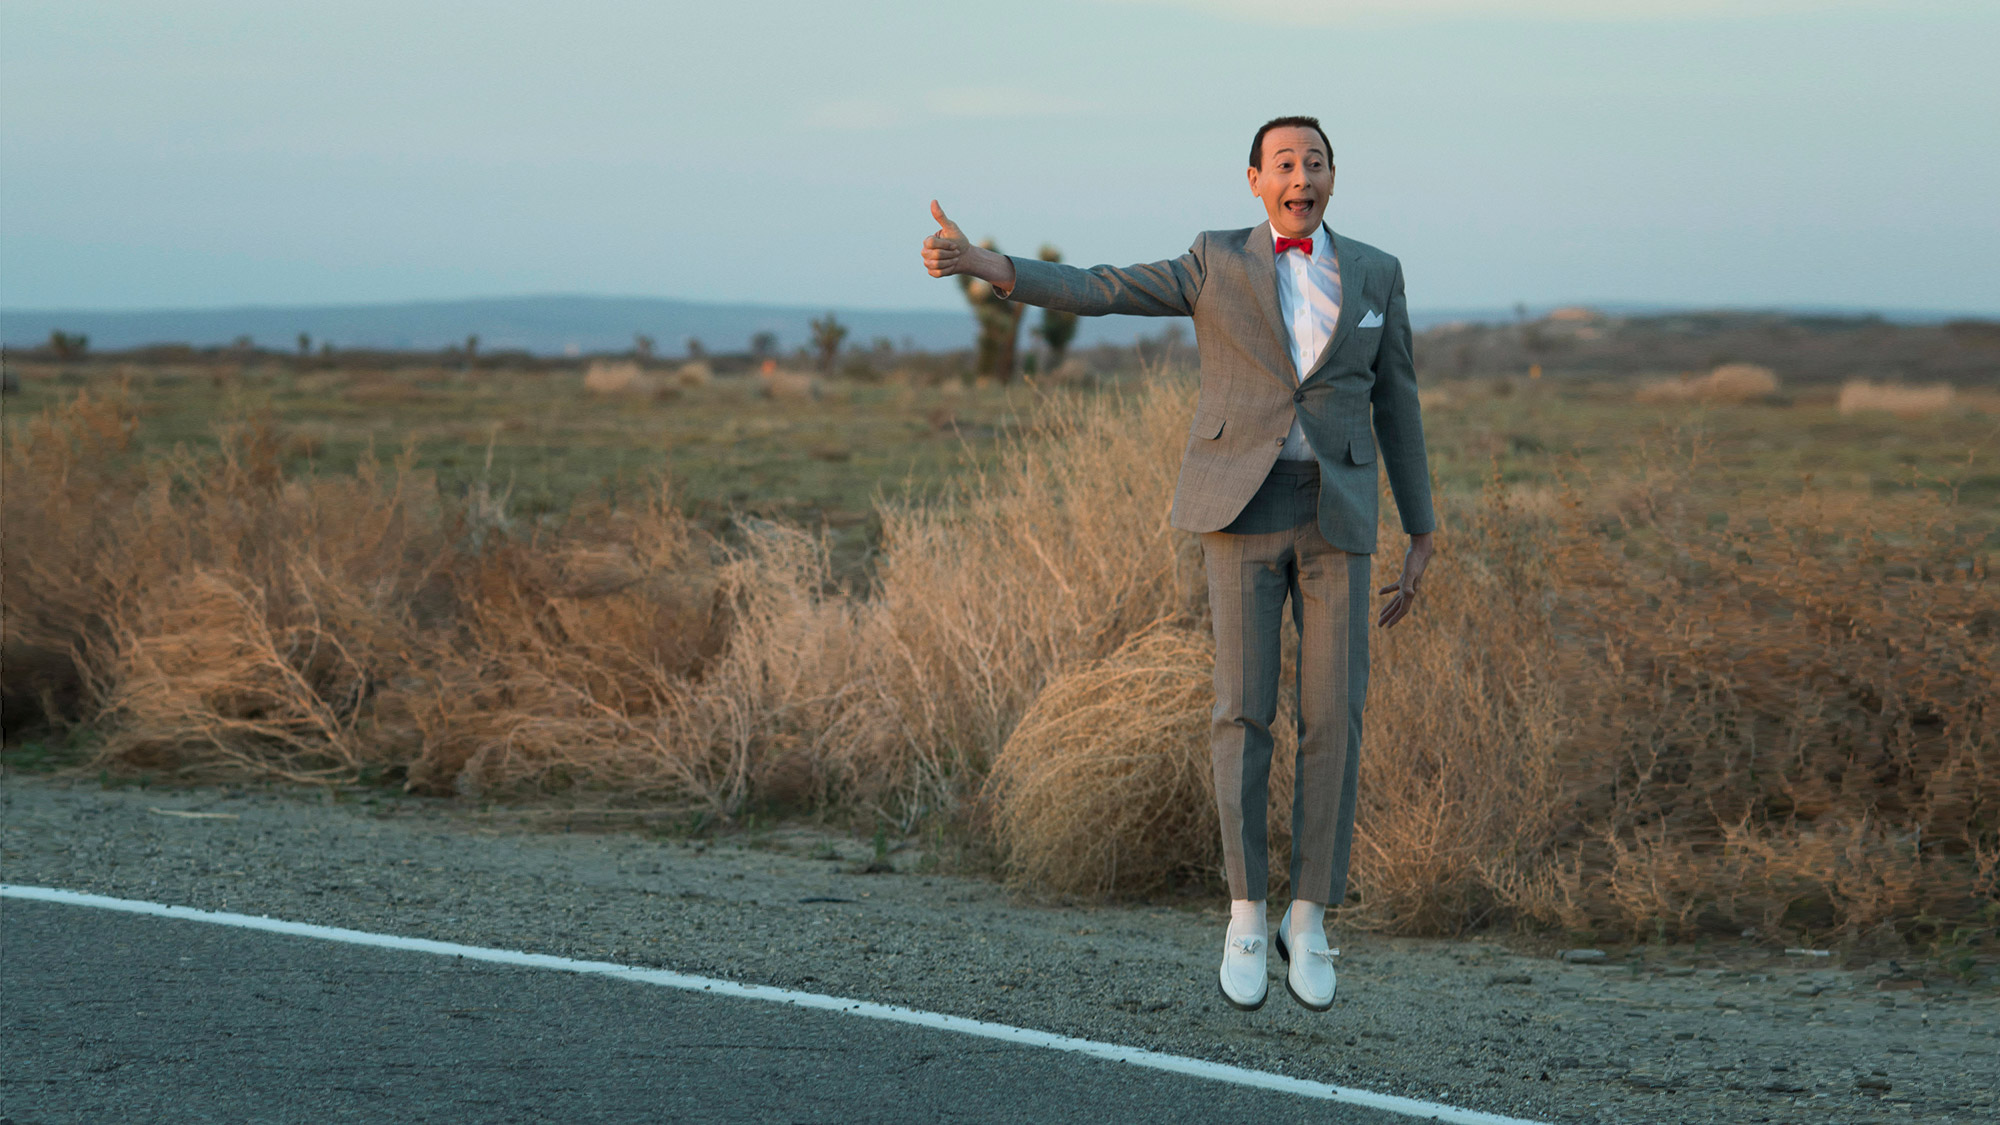 Best family movies on Netflix - Pee-wee's Big Holiday